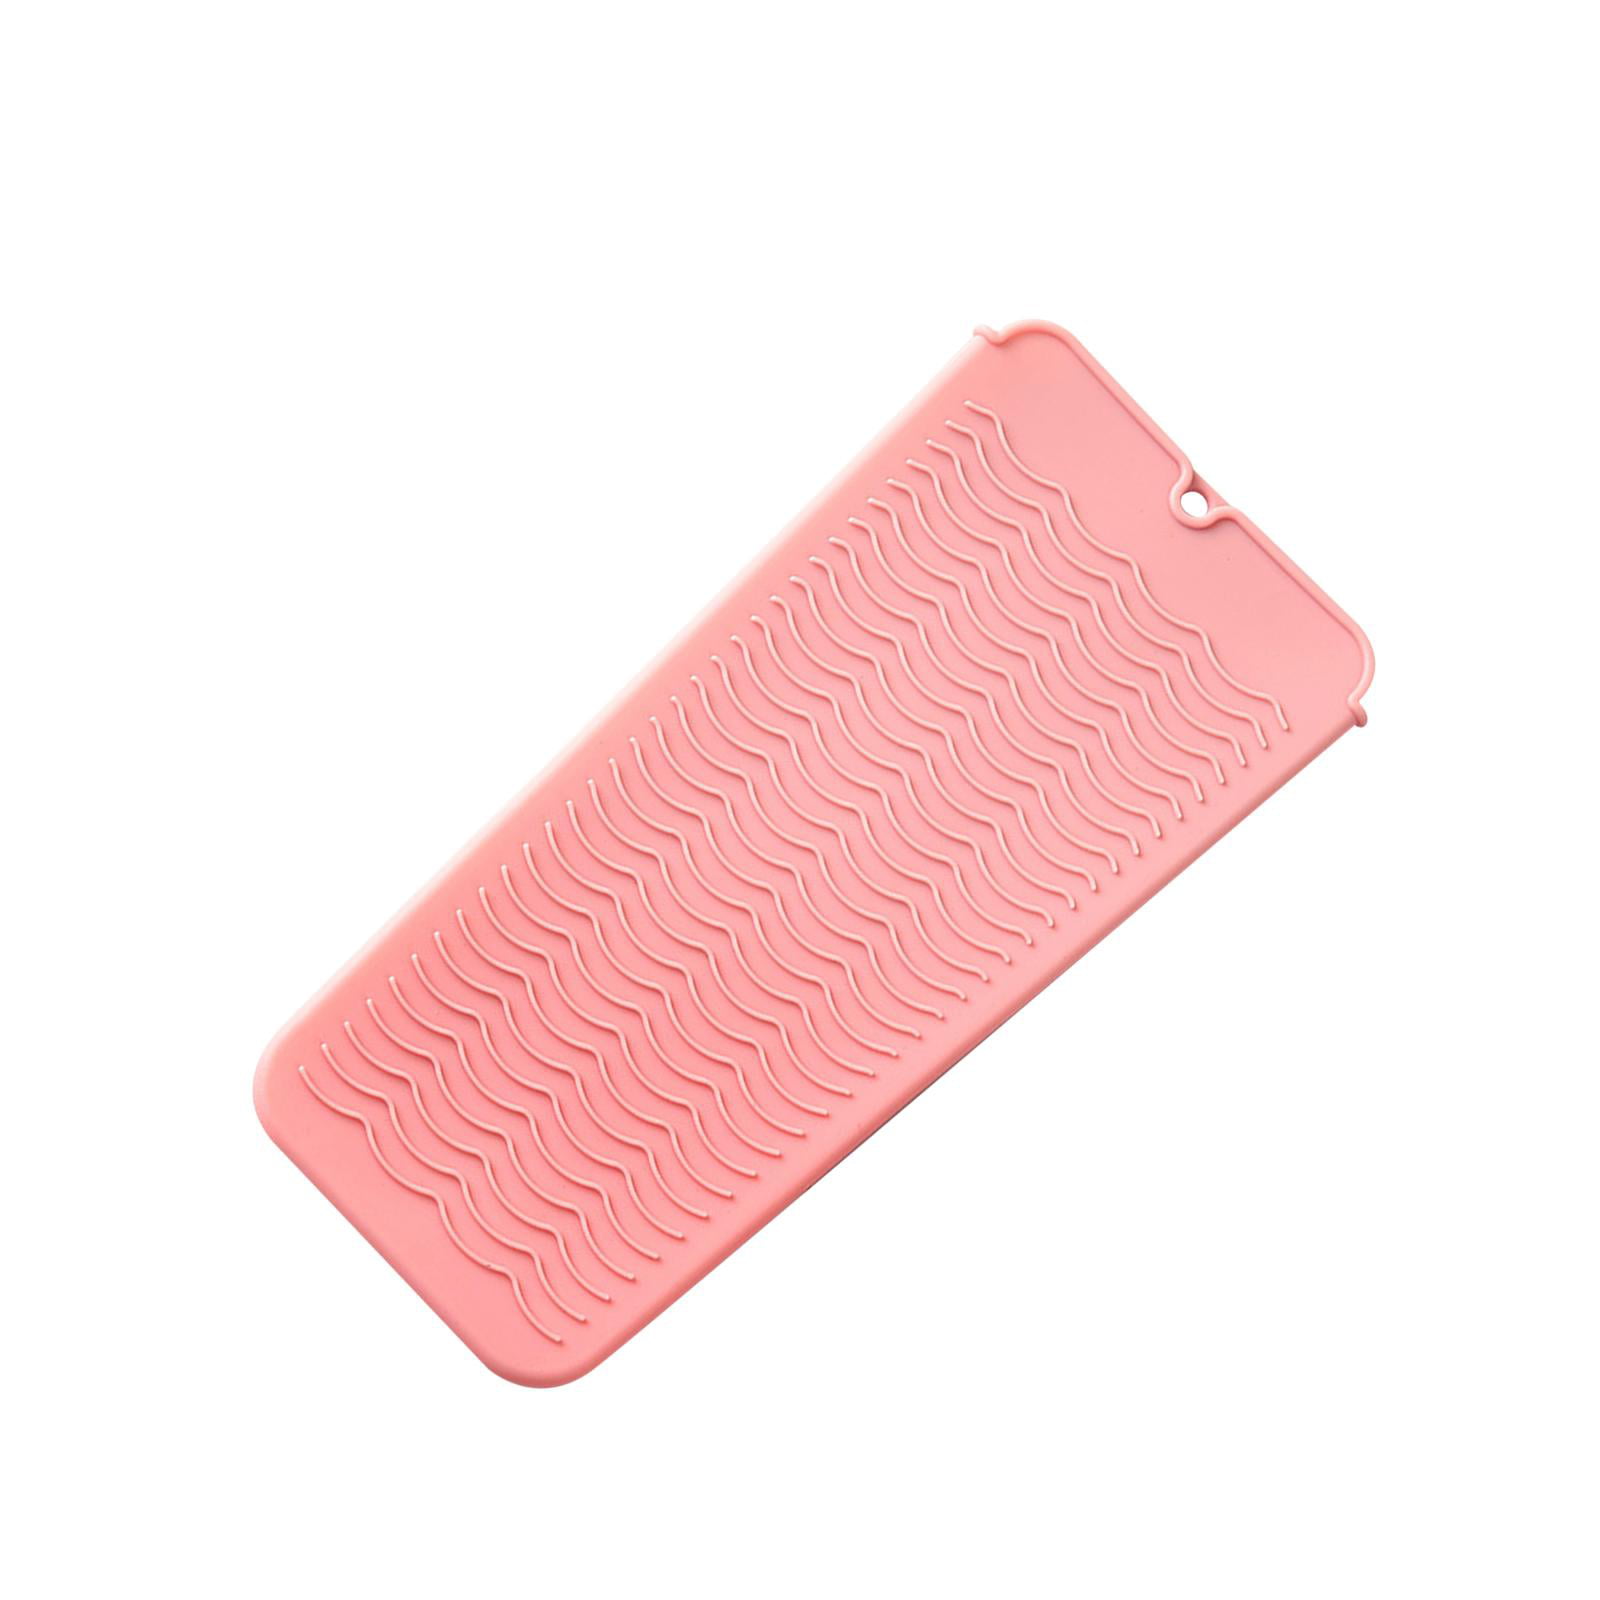 Gazechimp Protable Silicone Heat Resistant Mat Pouch for Curling Iron Hair Straightener Heat Insulation Flat Iron Hair Styling Tool Non Slip Pad, Men's, Size